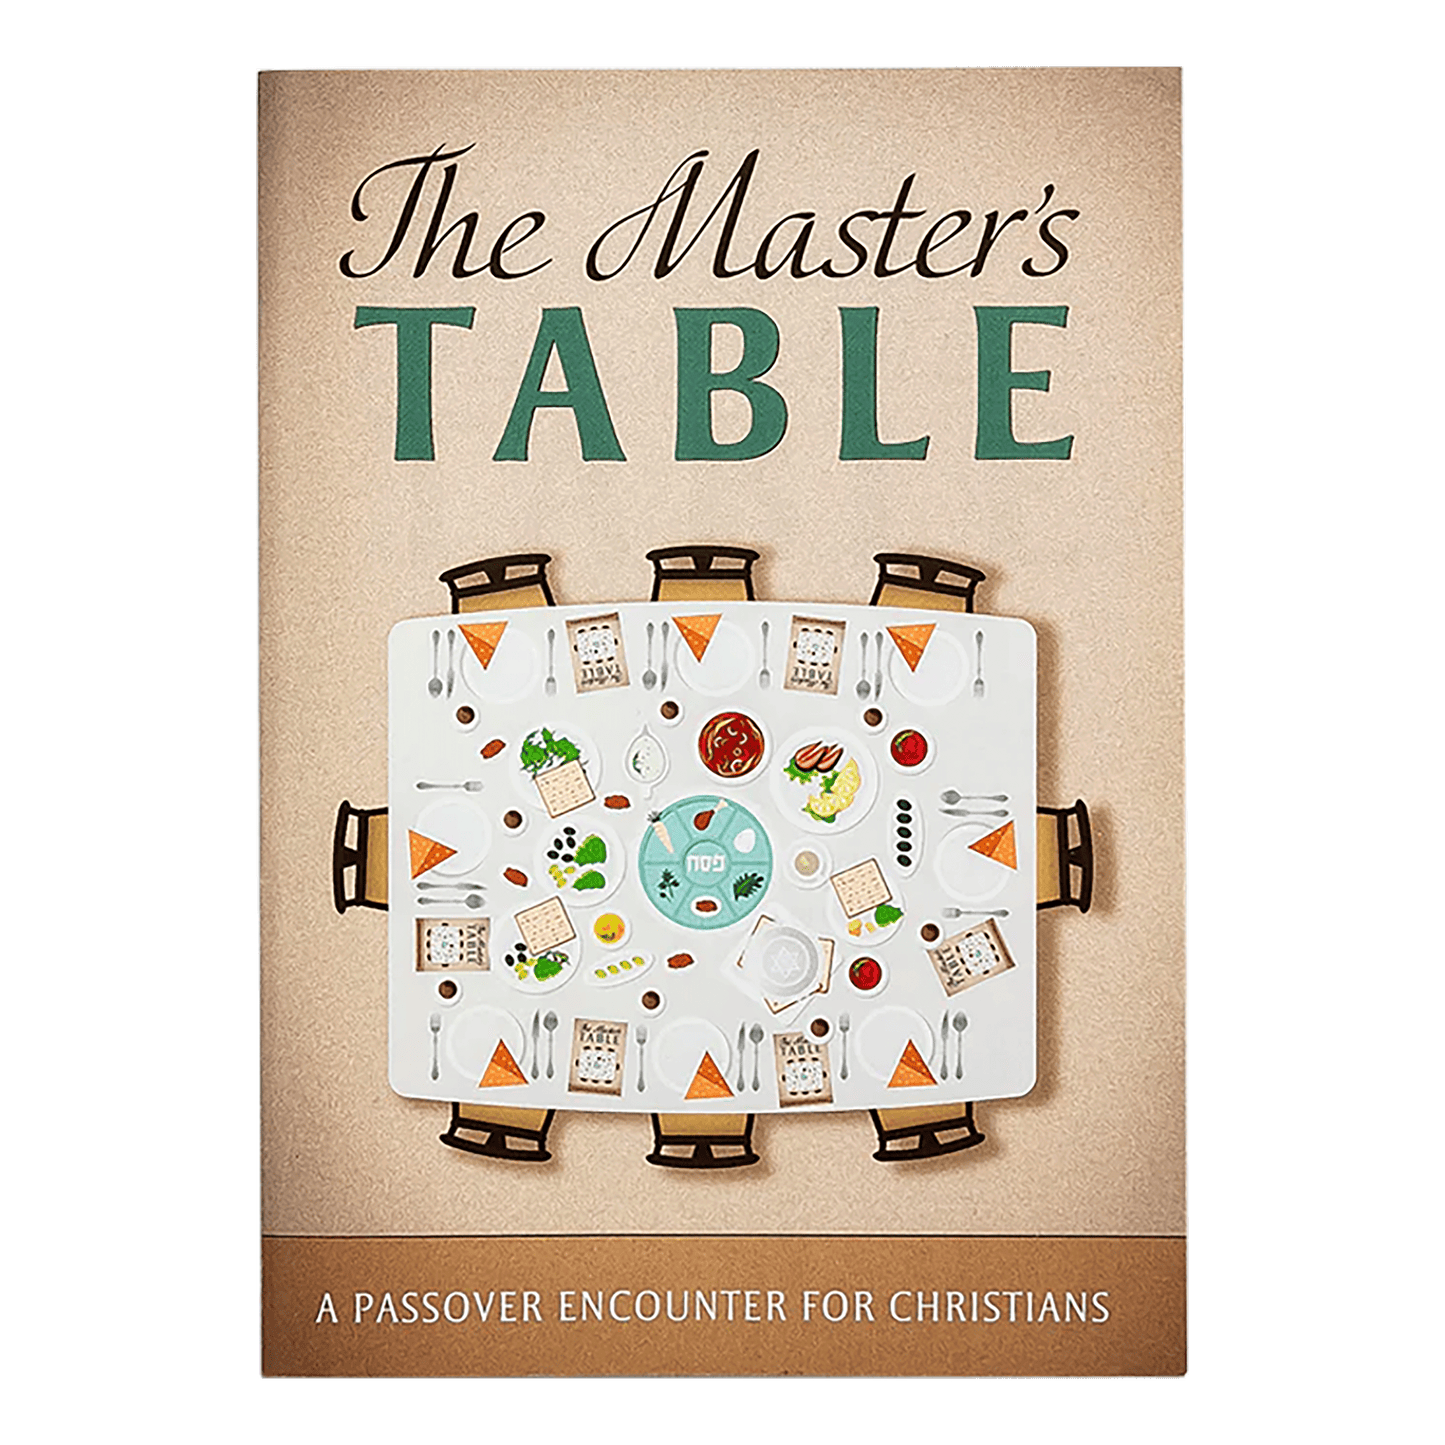 The Master’s Table: A Passover Encounter for Christians